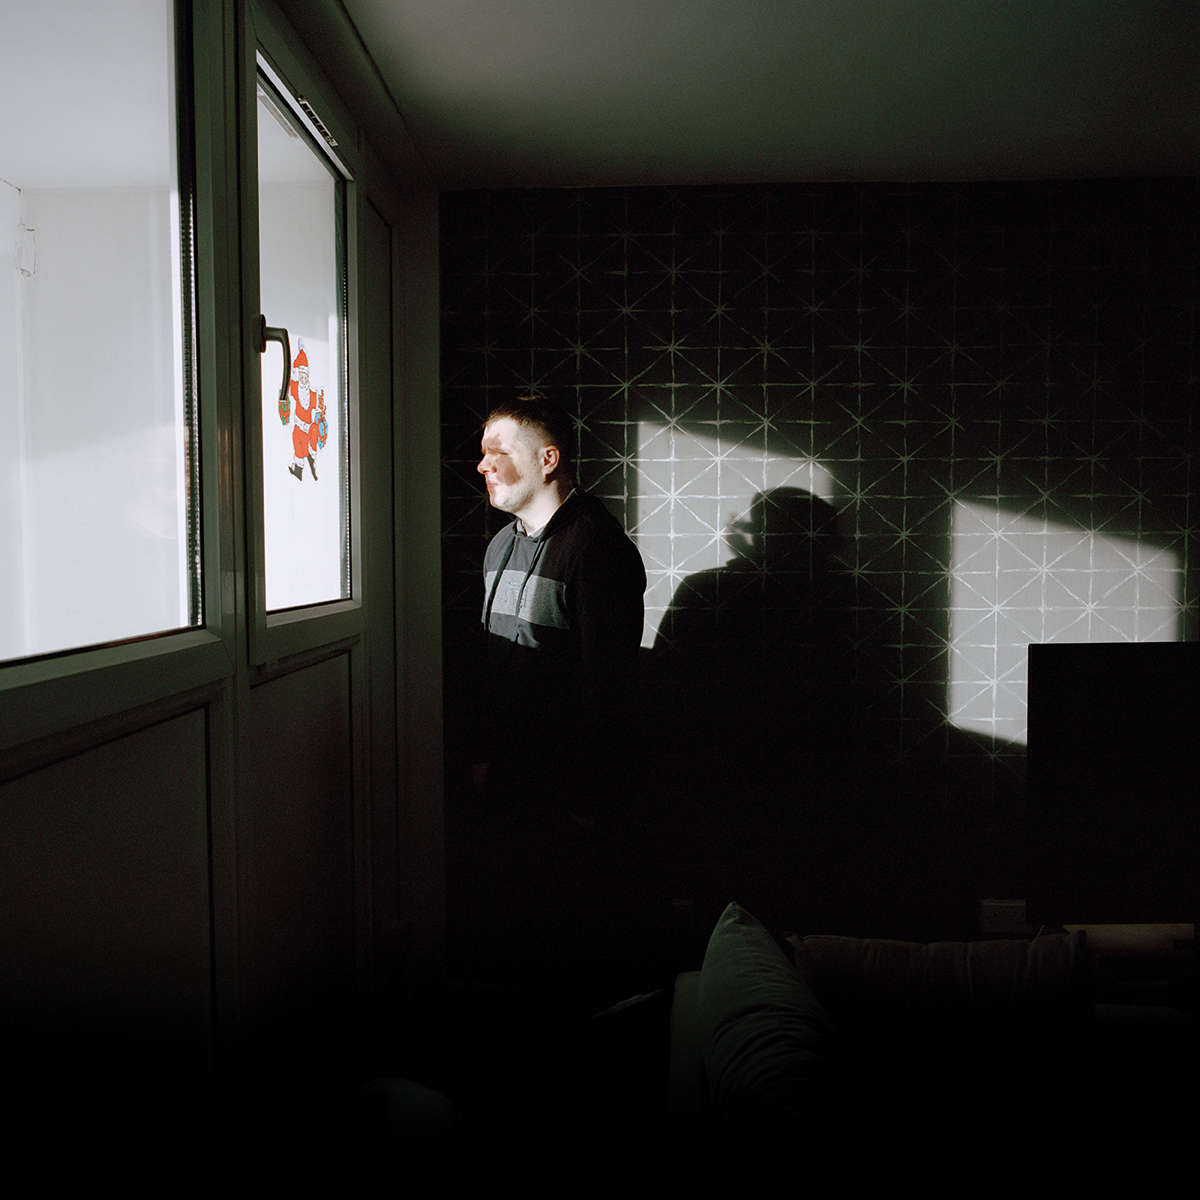 man looks out the window in shadow